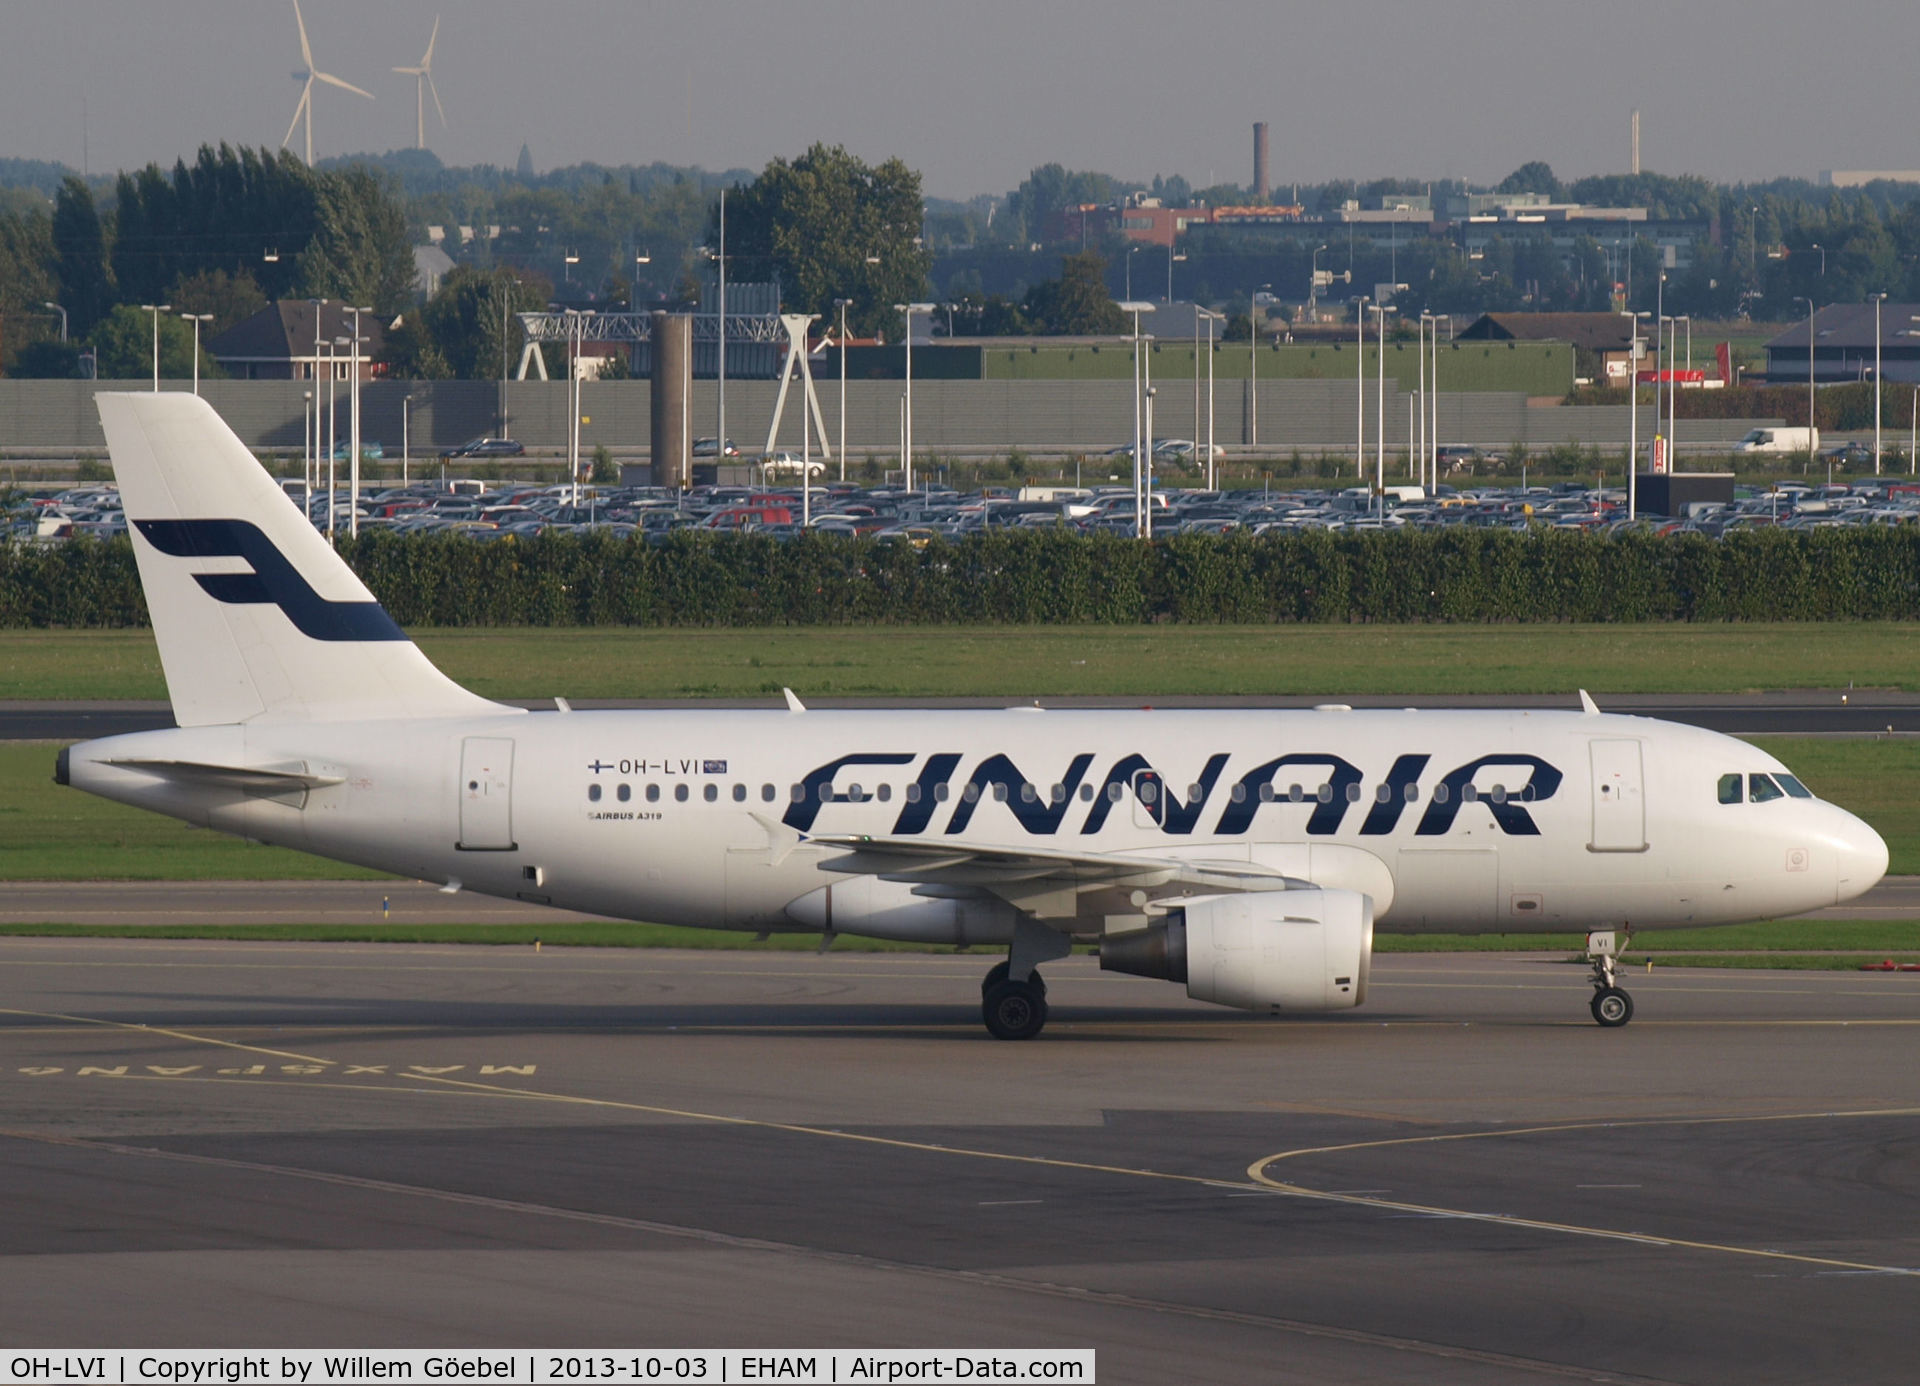 OH-LVI, 2000 Airbus A319-112 C/N 1364, Taxi to the gate of Schiphol Airport